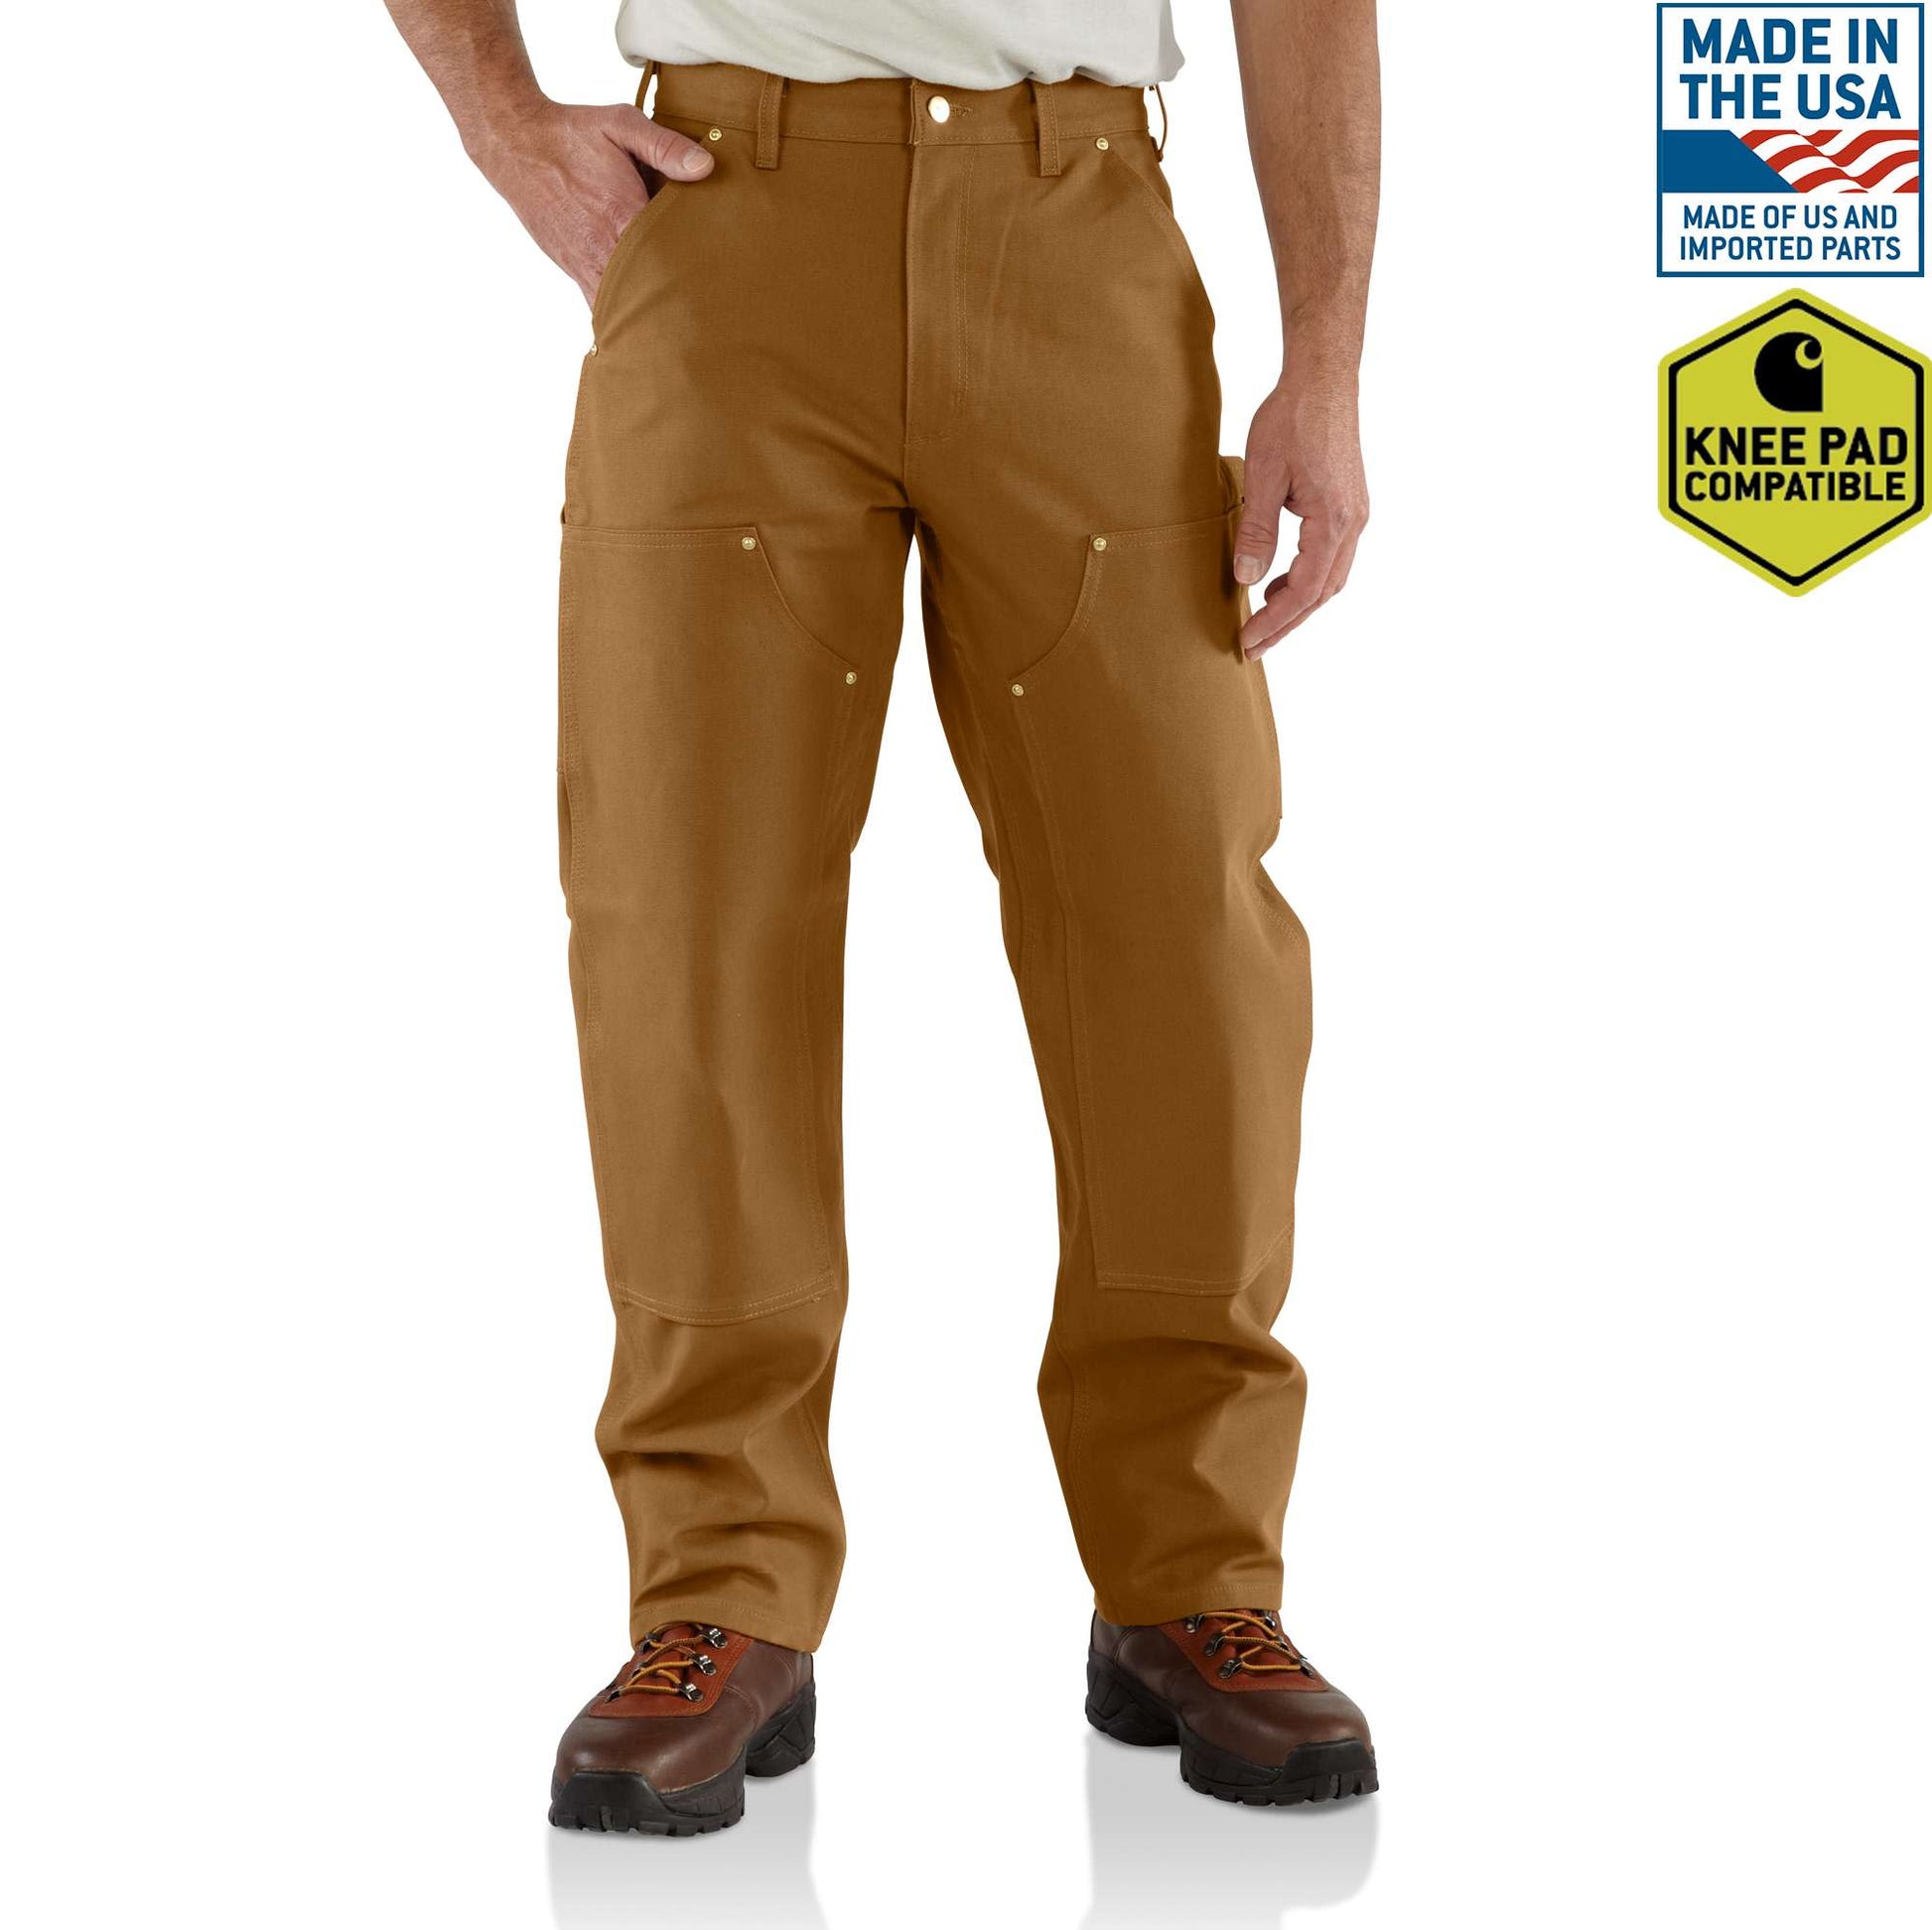 Carhartt 38 X 32 62W Duck Double Front Knee Work Pants USA Union